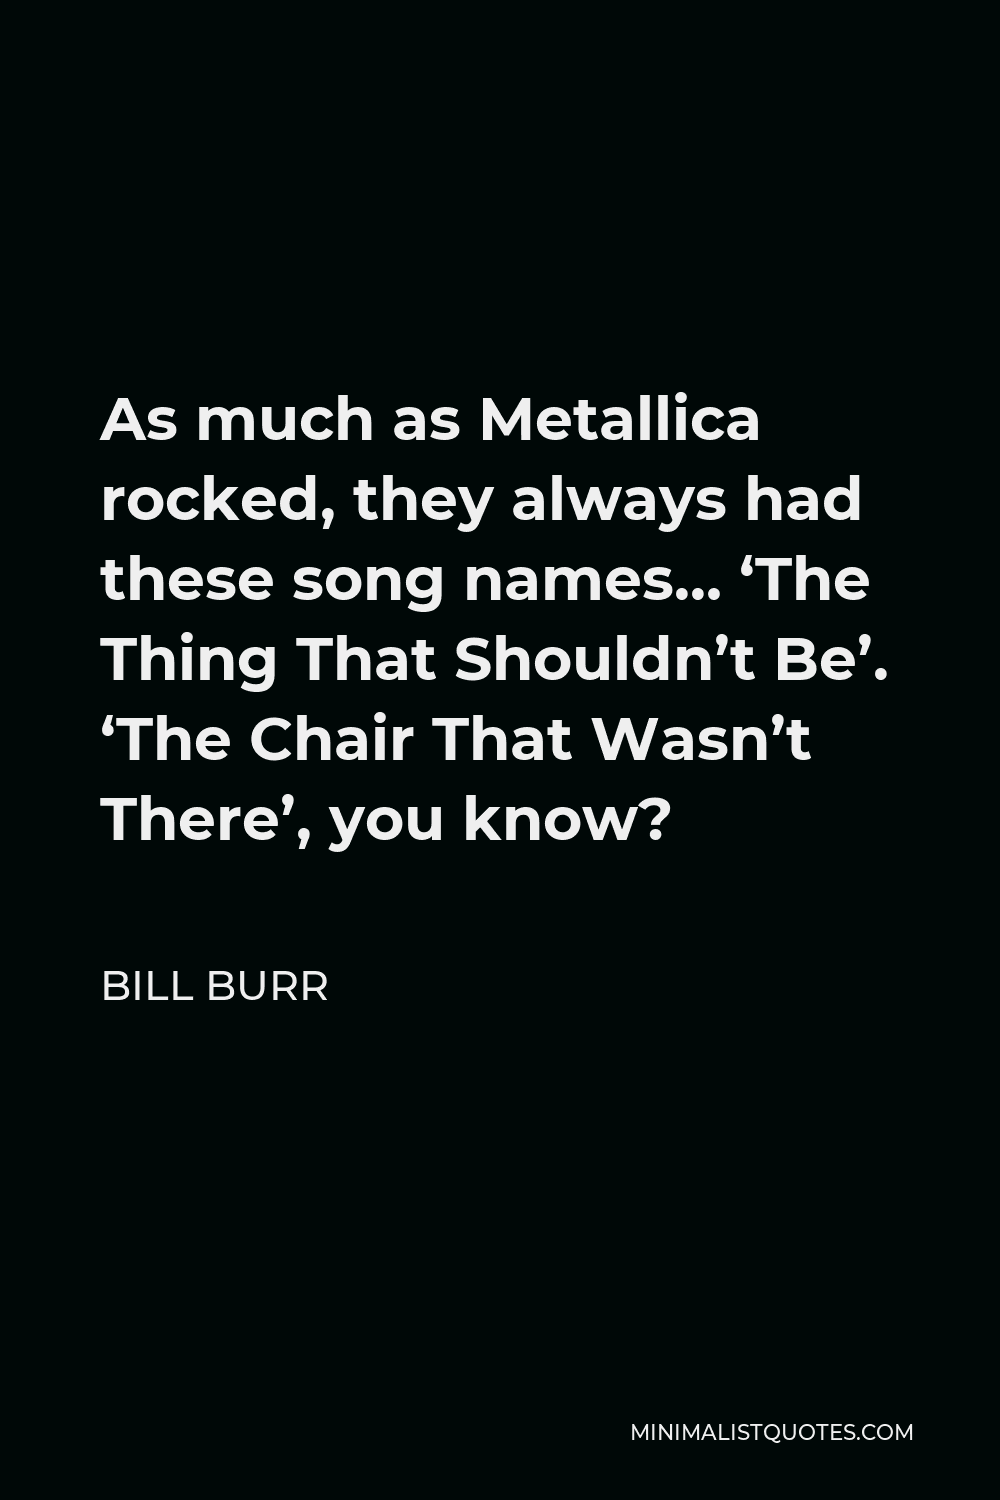 Bill Burr Quote - As much as Metallica rocked, they always had these song names… ‘The Thing That Shouldn’t Be’. ‘The Chair That Wasn’t There’, you know?